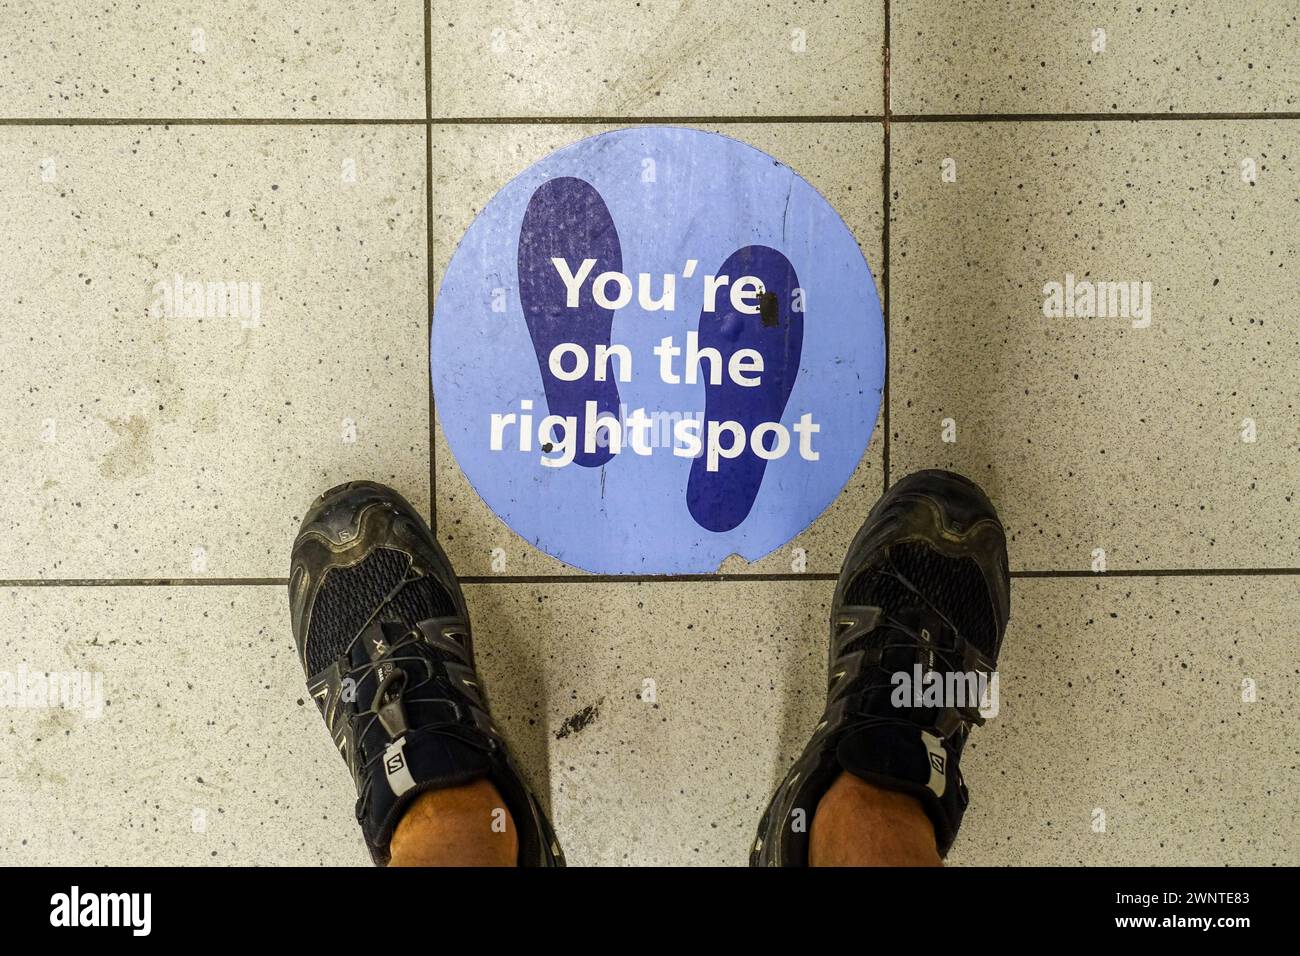 Feet above the Schiphol airport floor, with a 'You're on the right spot' sign, during covid lockdown restrictions for social distancing Stock Photo